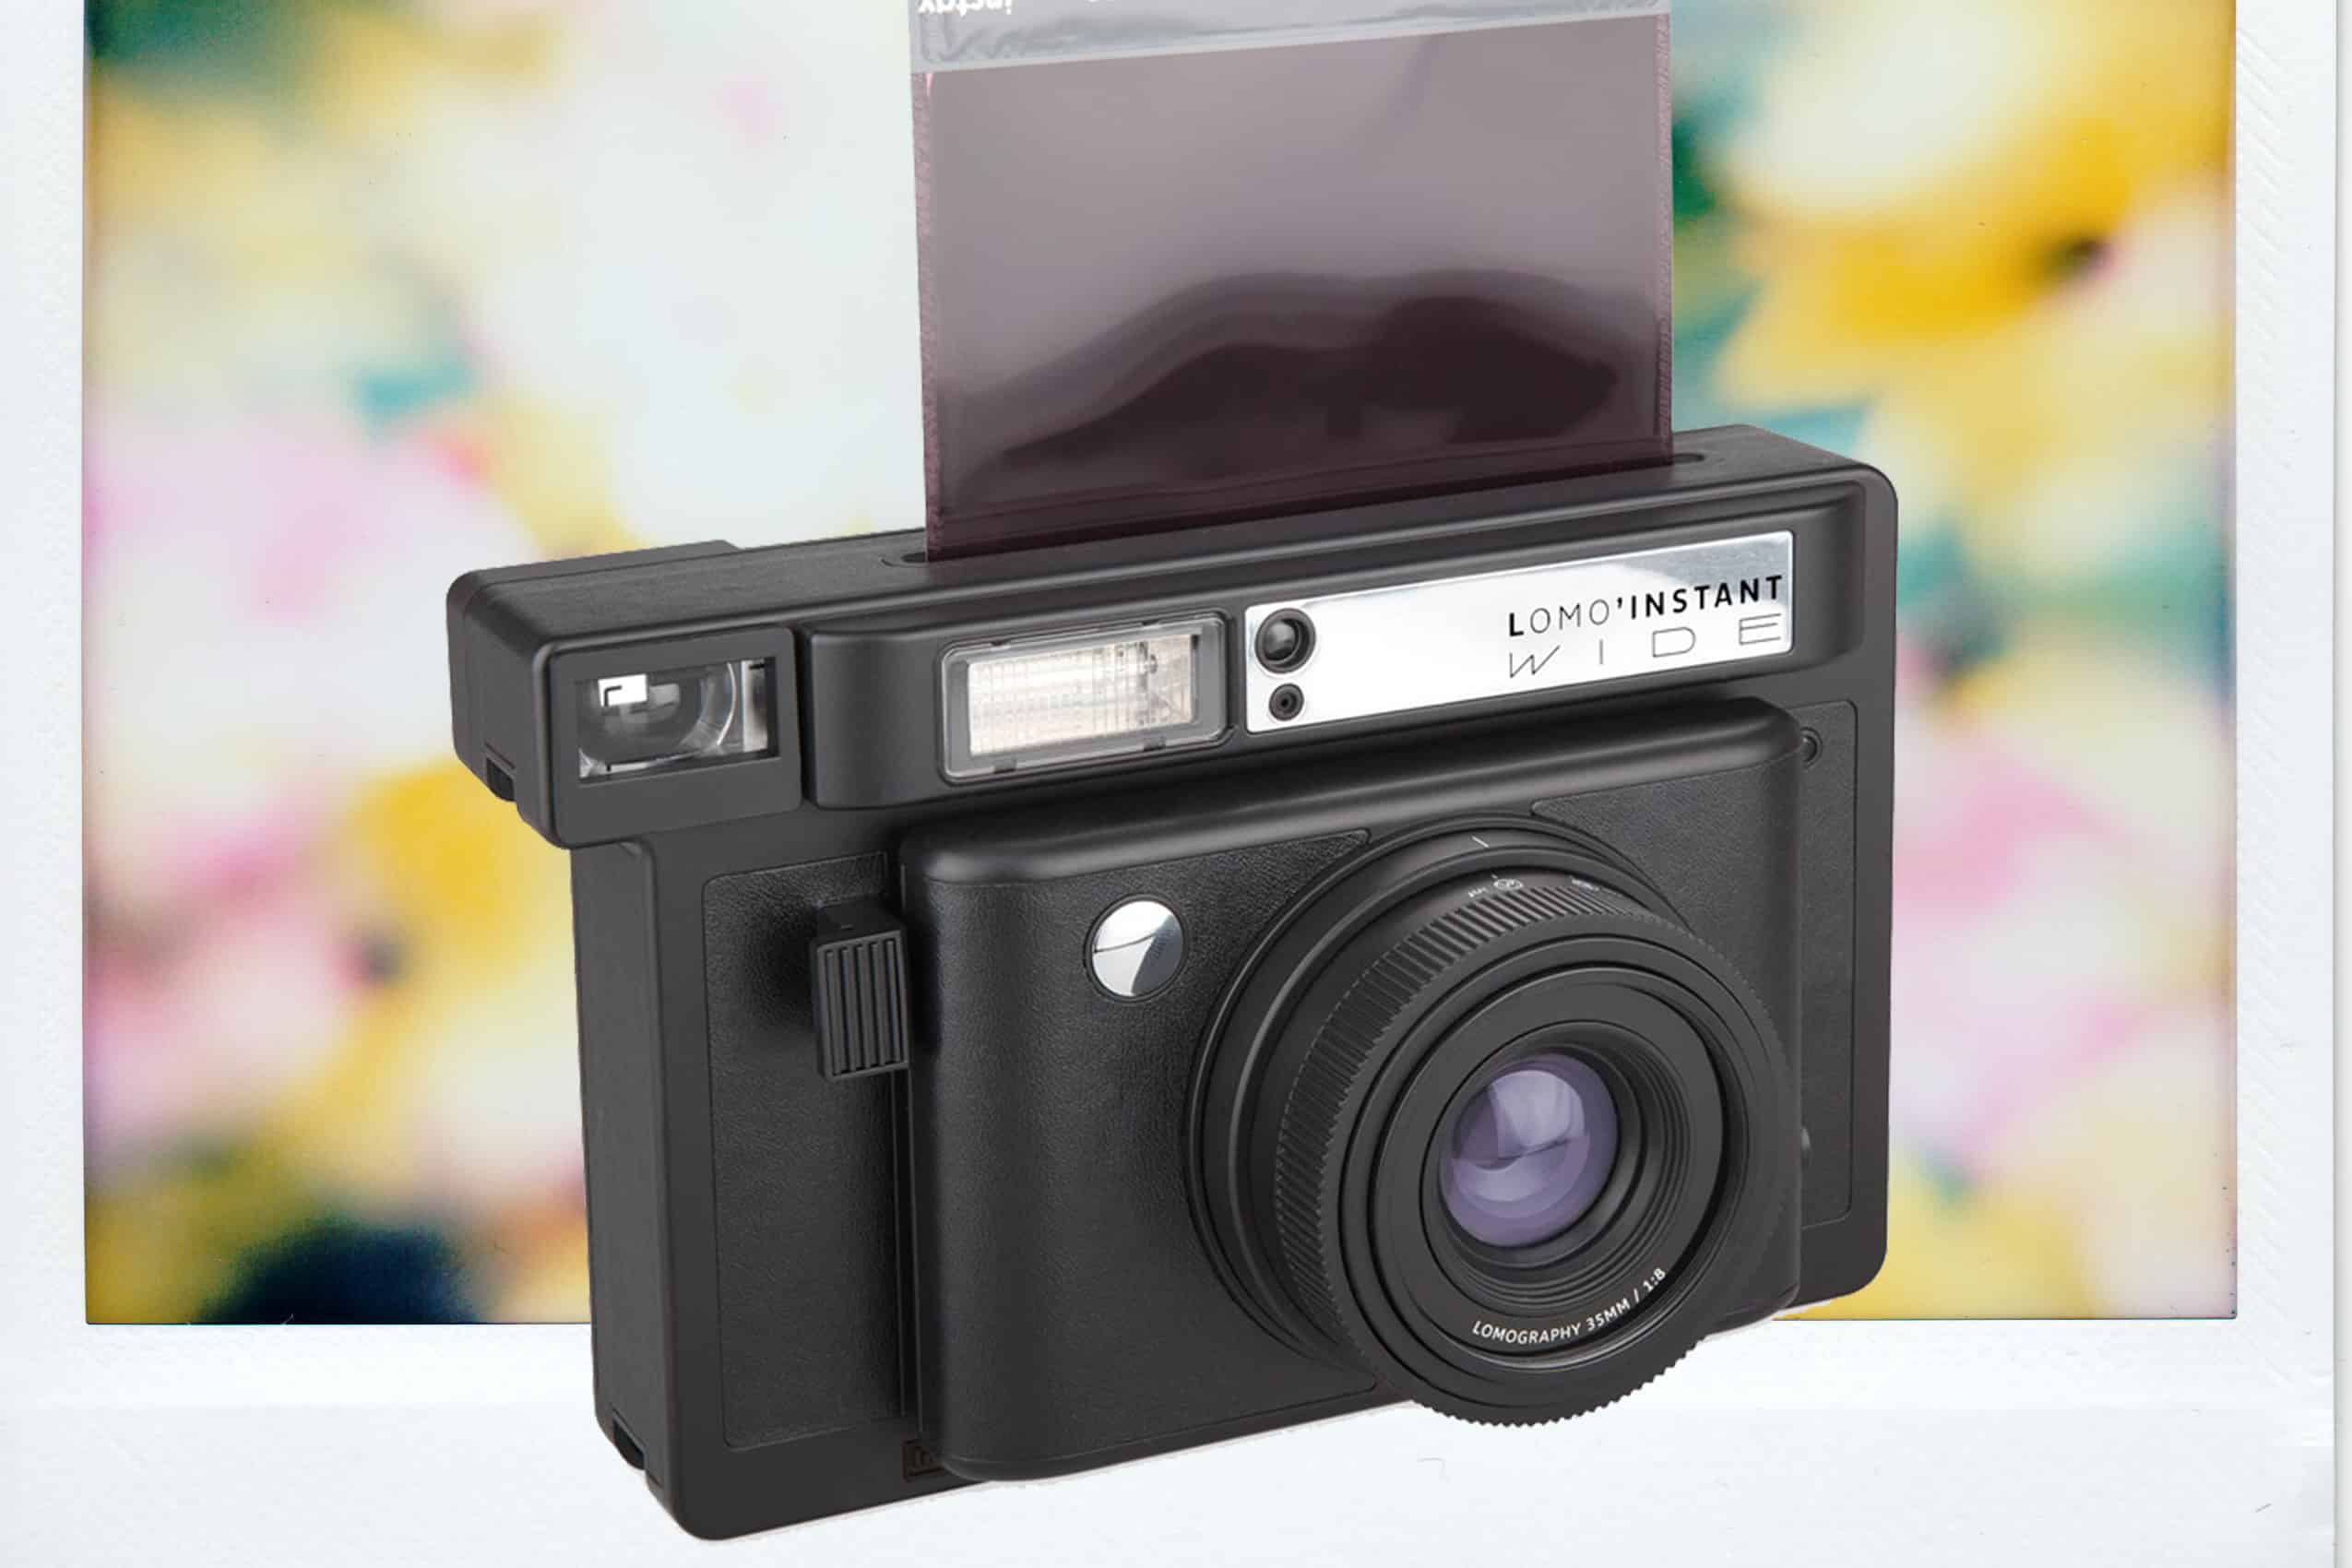 Review: Lomography’s Lomo’Instant Wide for Instax Film is Addictive